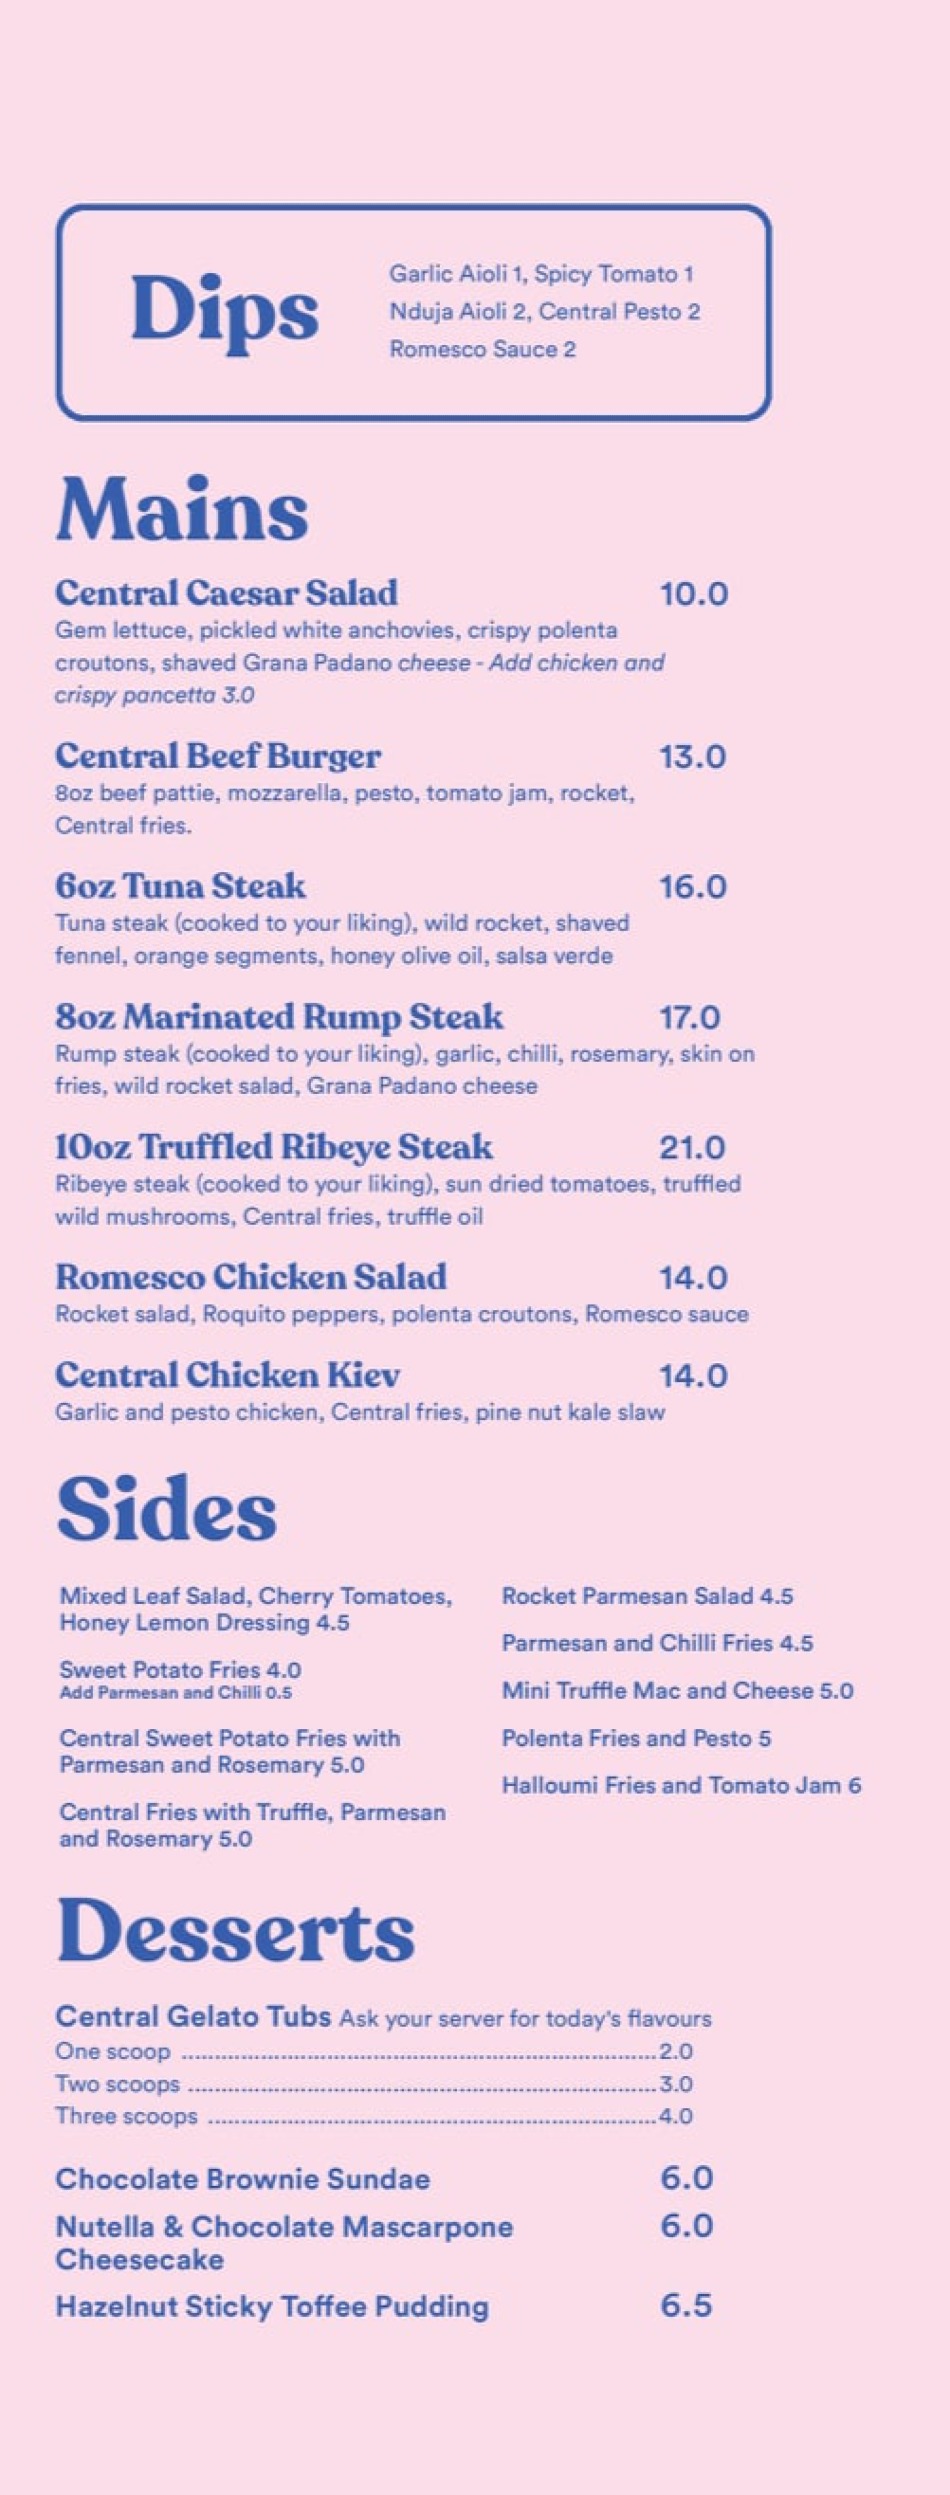 Takeaway Restaurant Menu Page - Central Oven & Shaker Pizza place - Newcastle upon Tyne